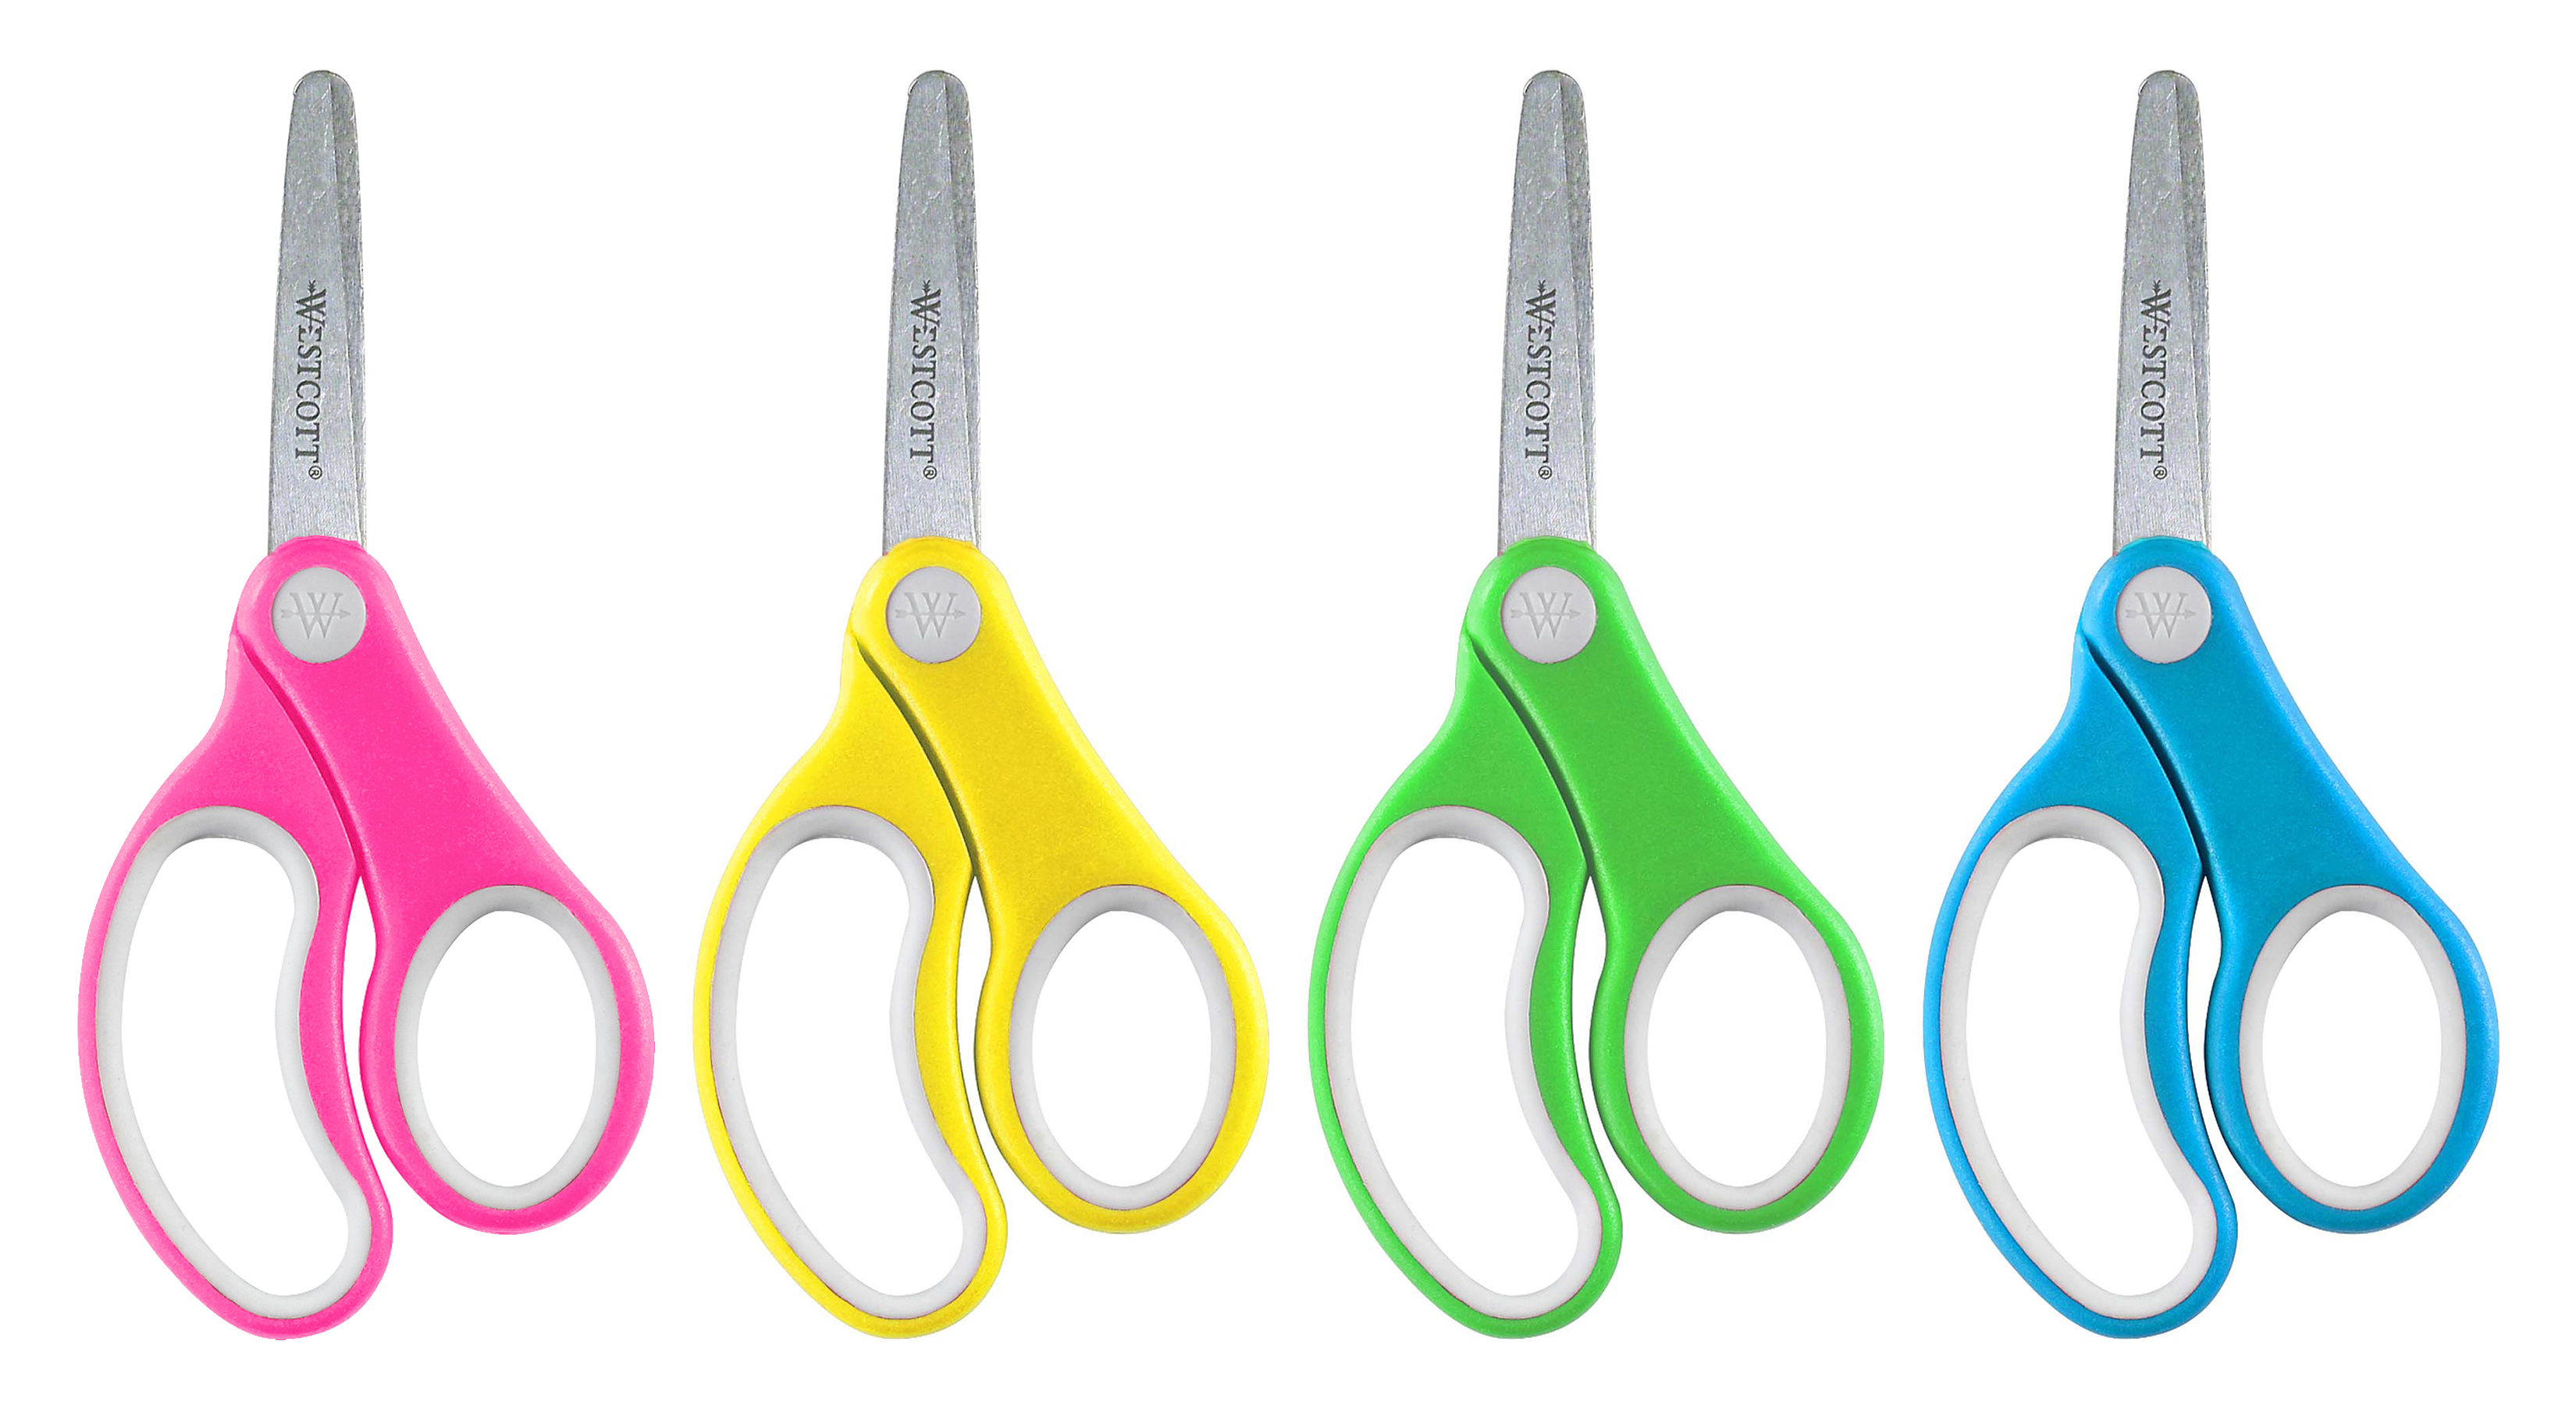 Select Colour Westcott 5" Softgrip Safety Scissors Children Rounded Blunt Tips 